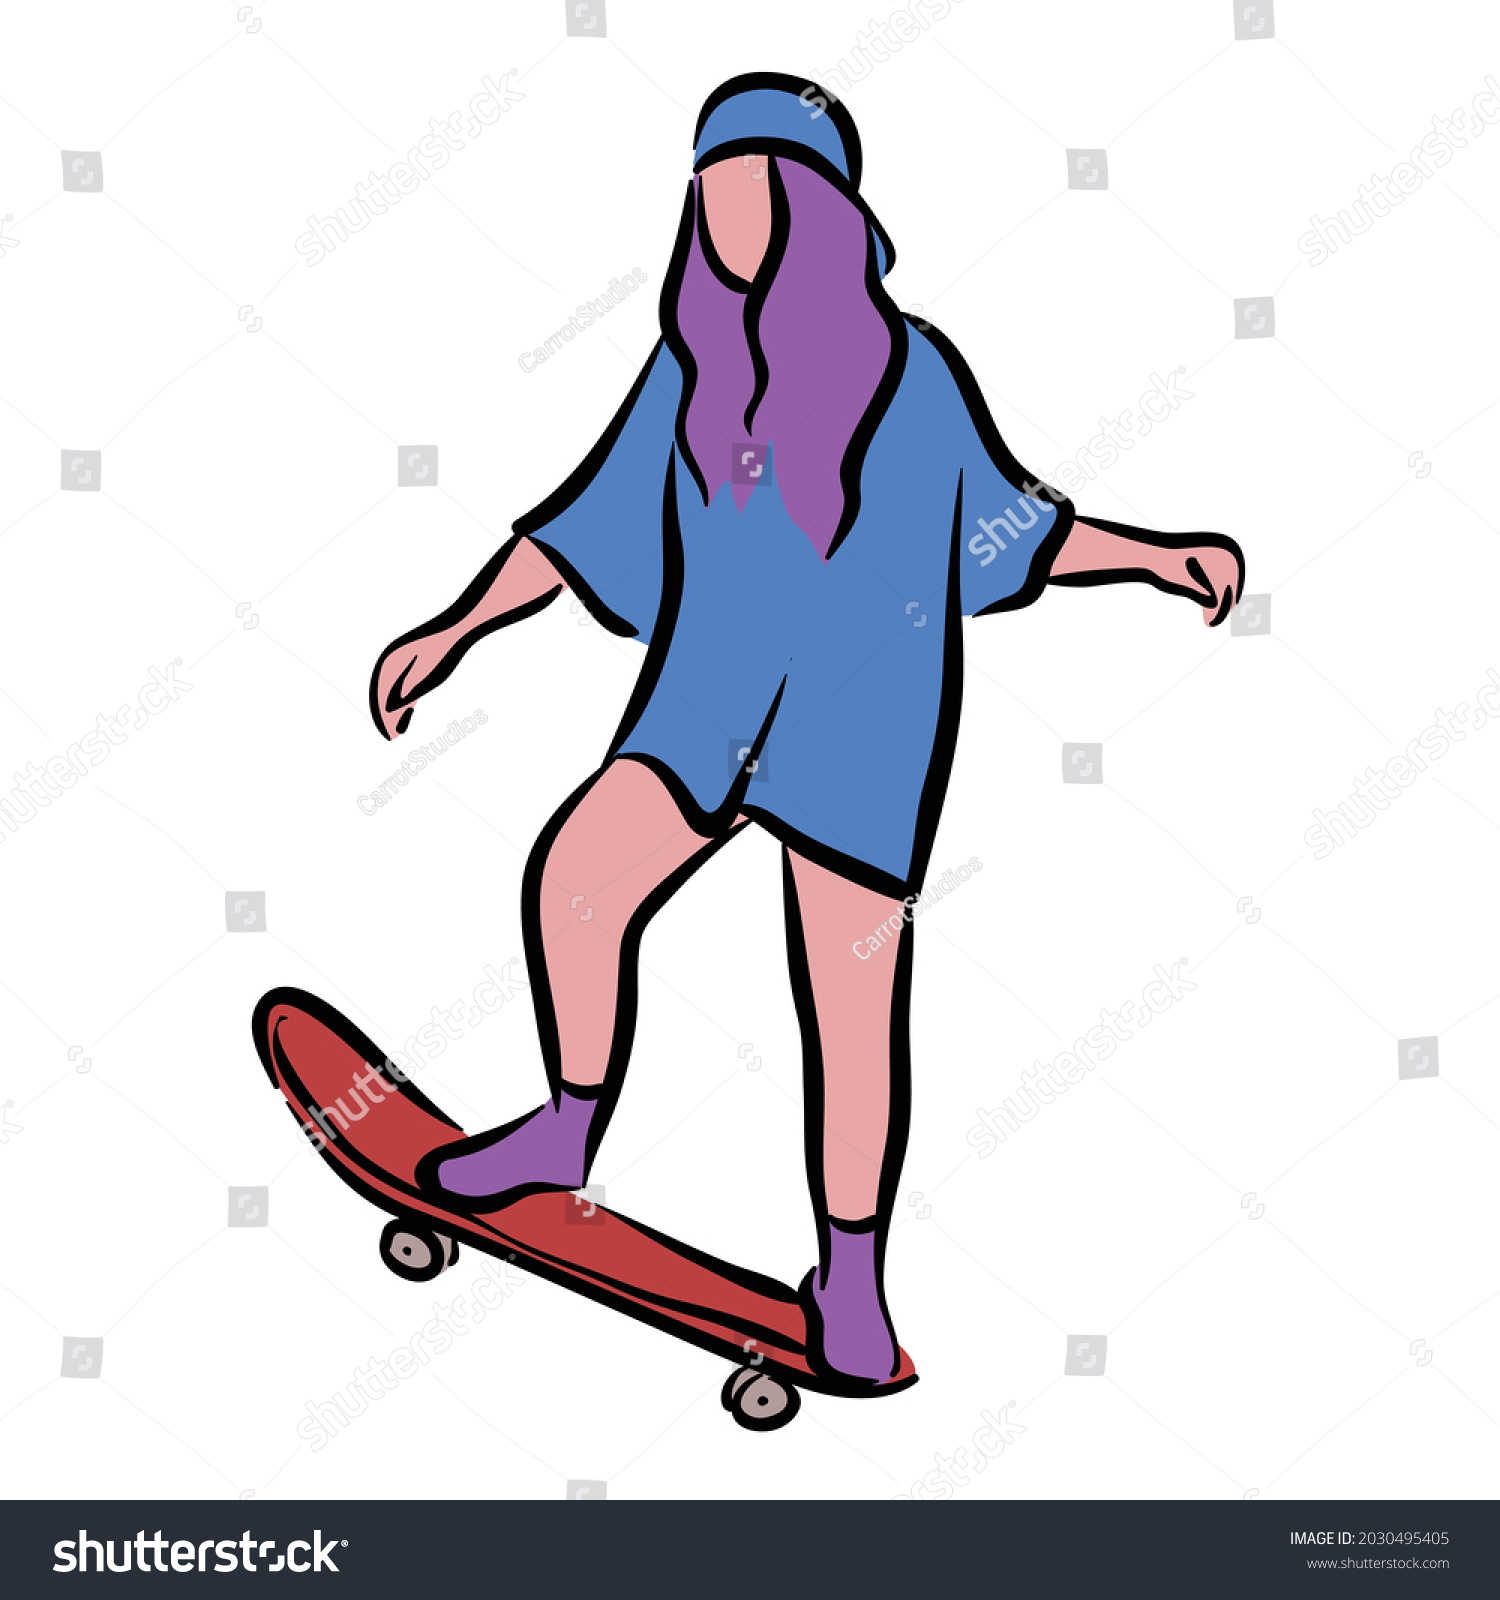 Skating Sexy Woman Clip Art Stock Vector Royalty Free 2030495405 Shutterstock